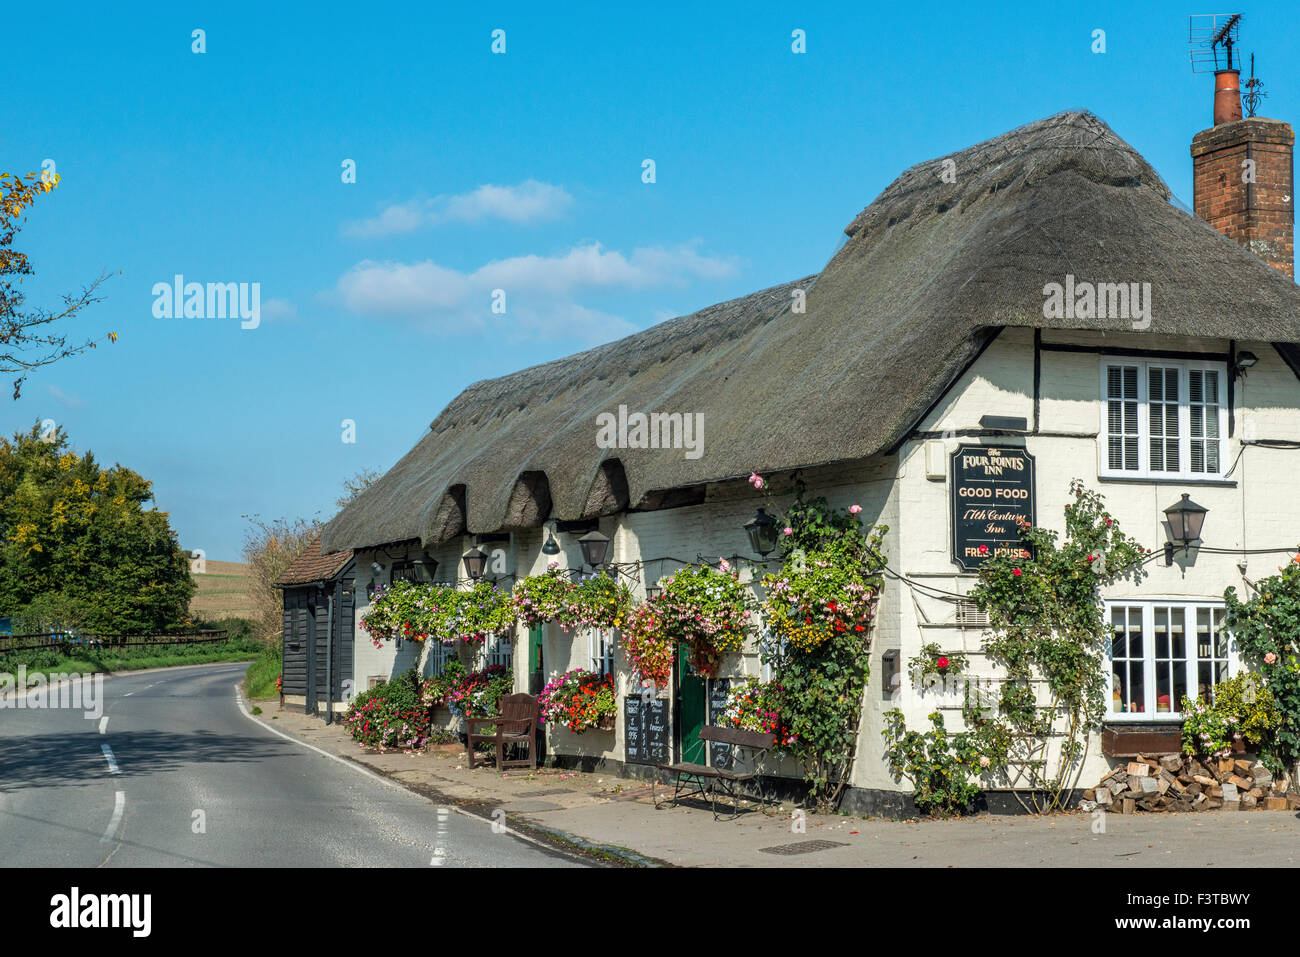 The Four Points Inn at Aldworth West Berkshire England UK Stock Photo